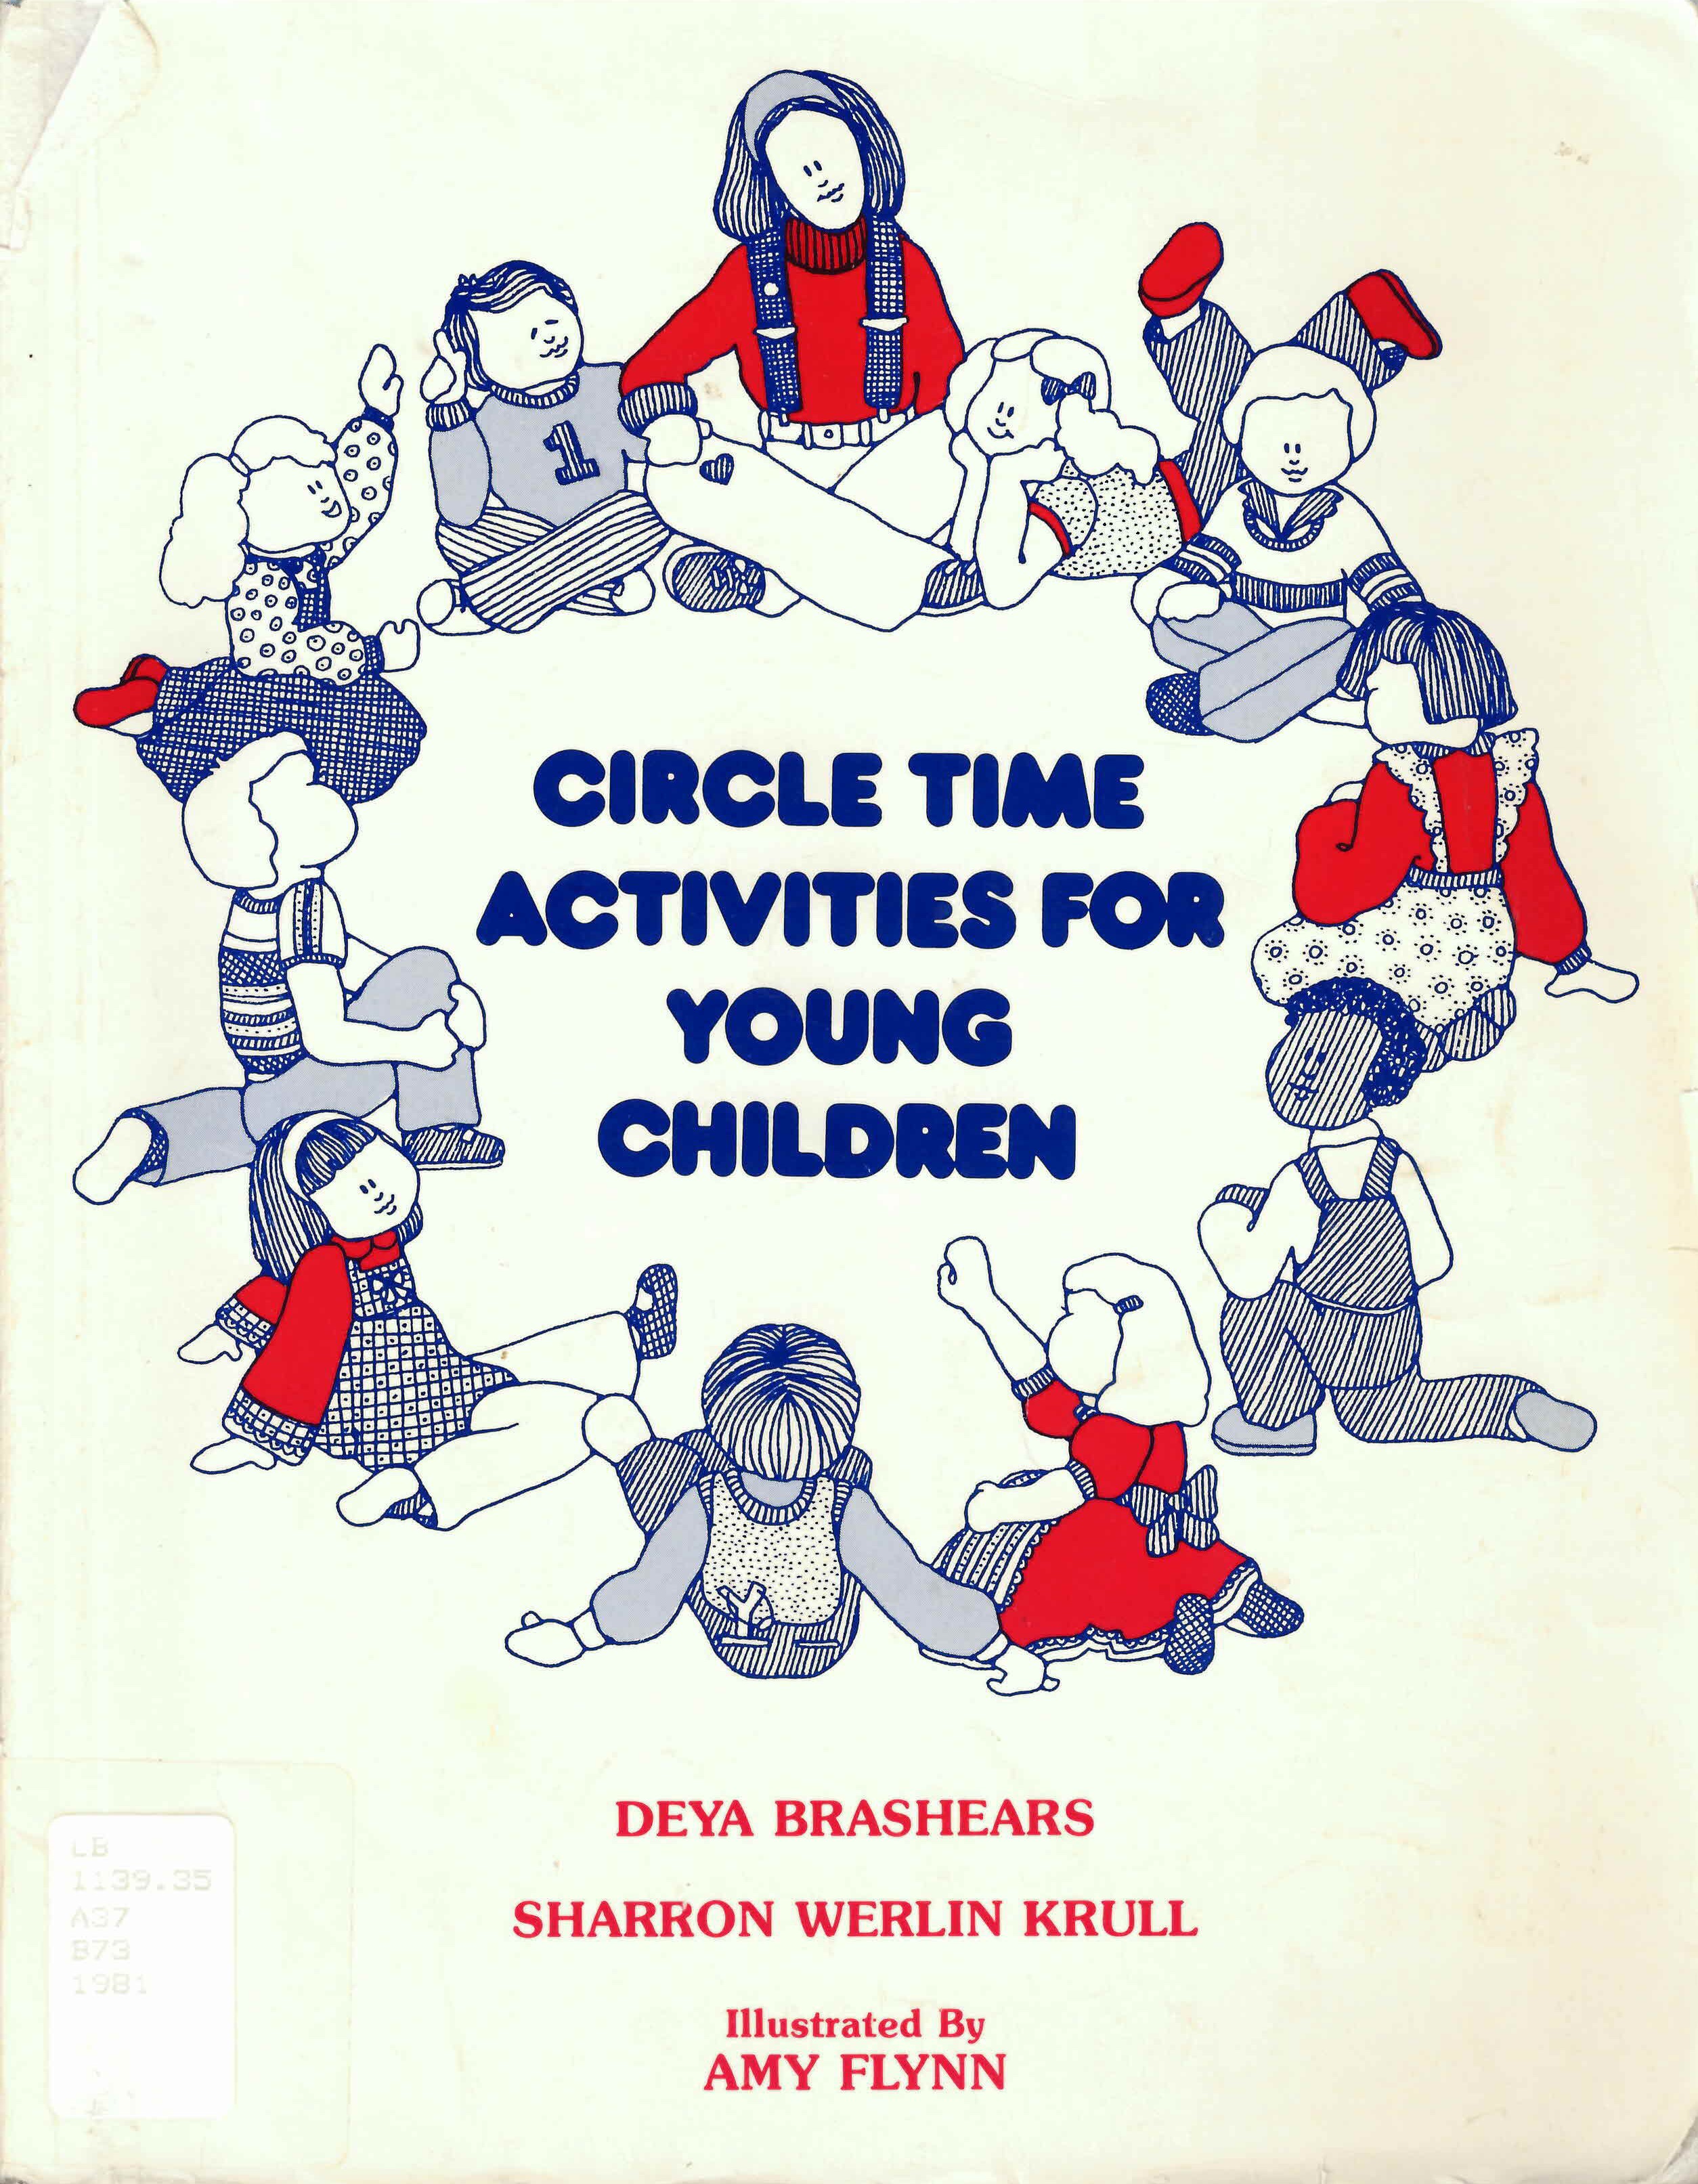 Circle time activities for young children